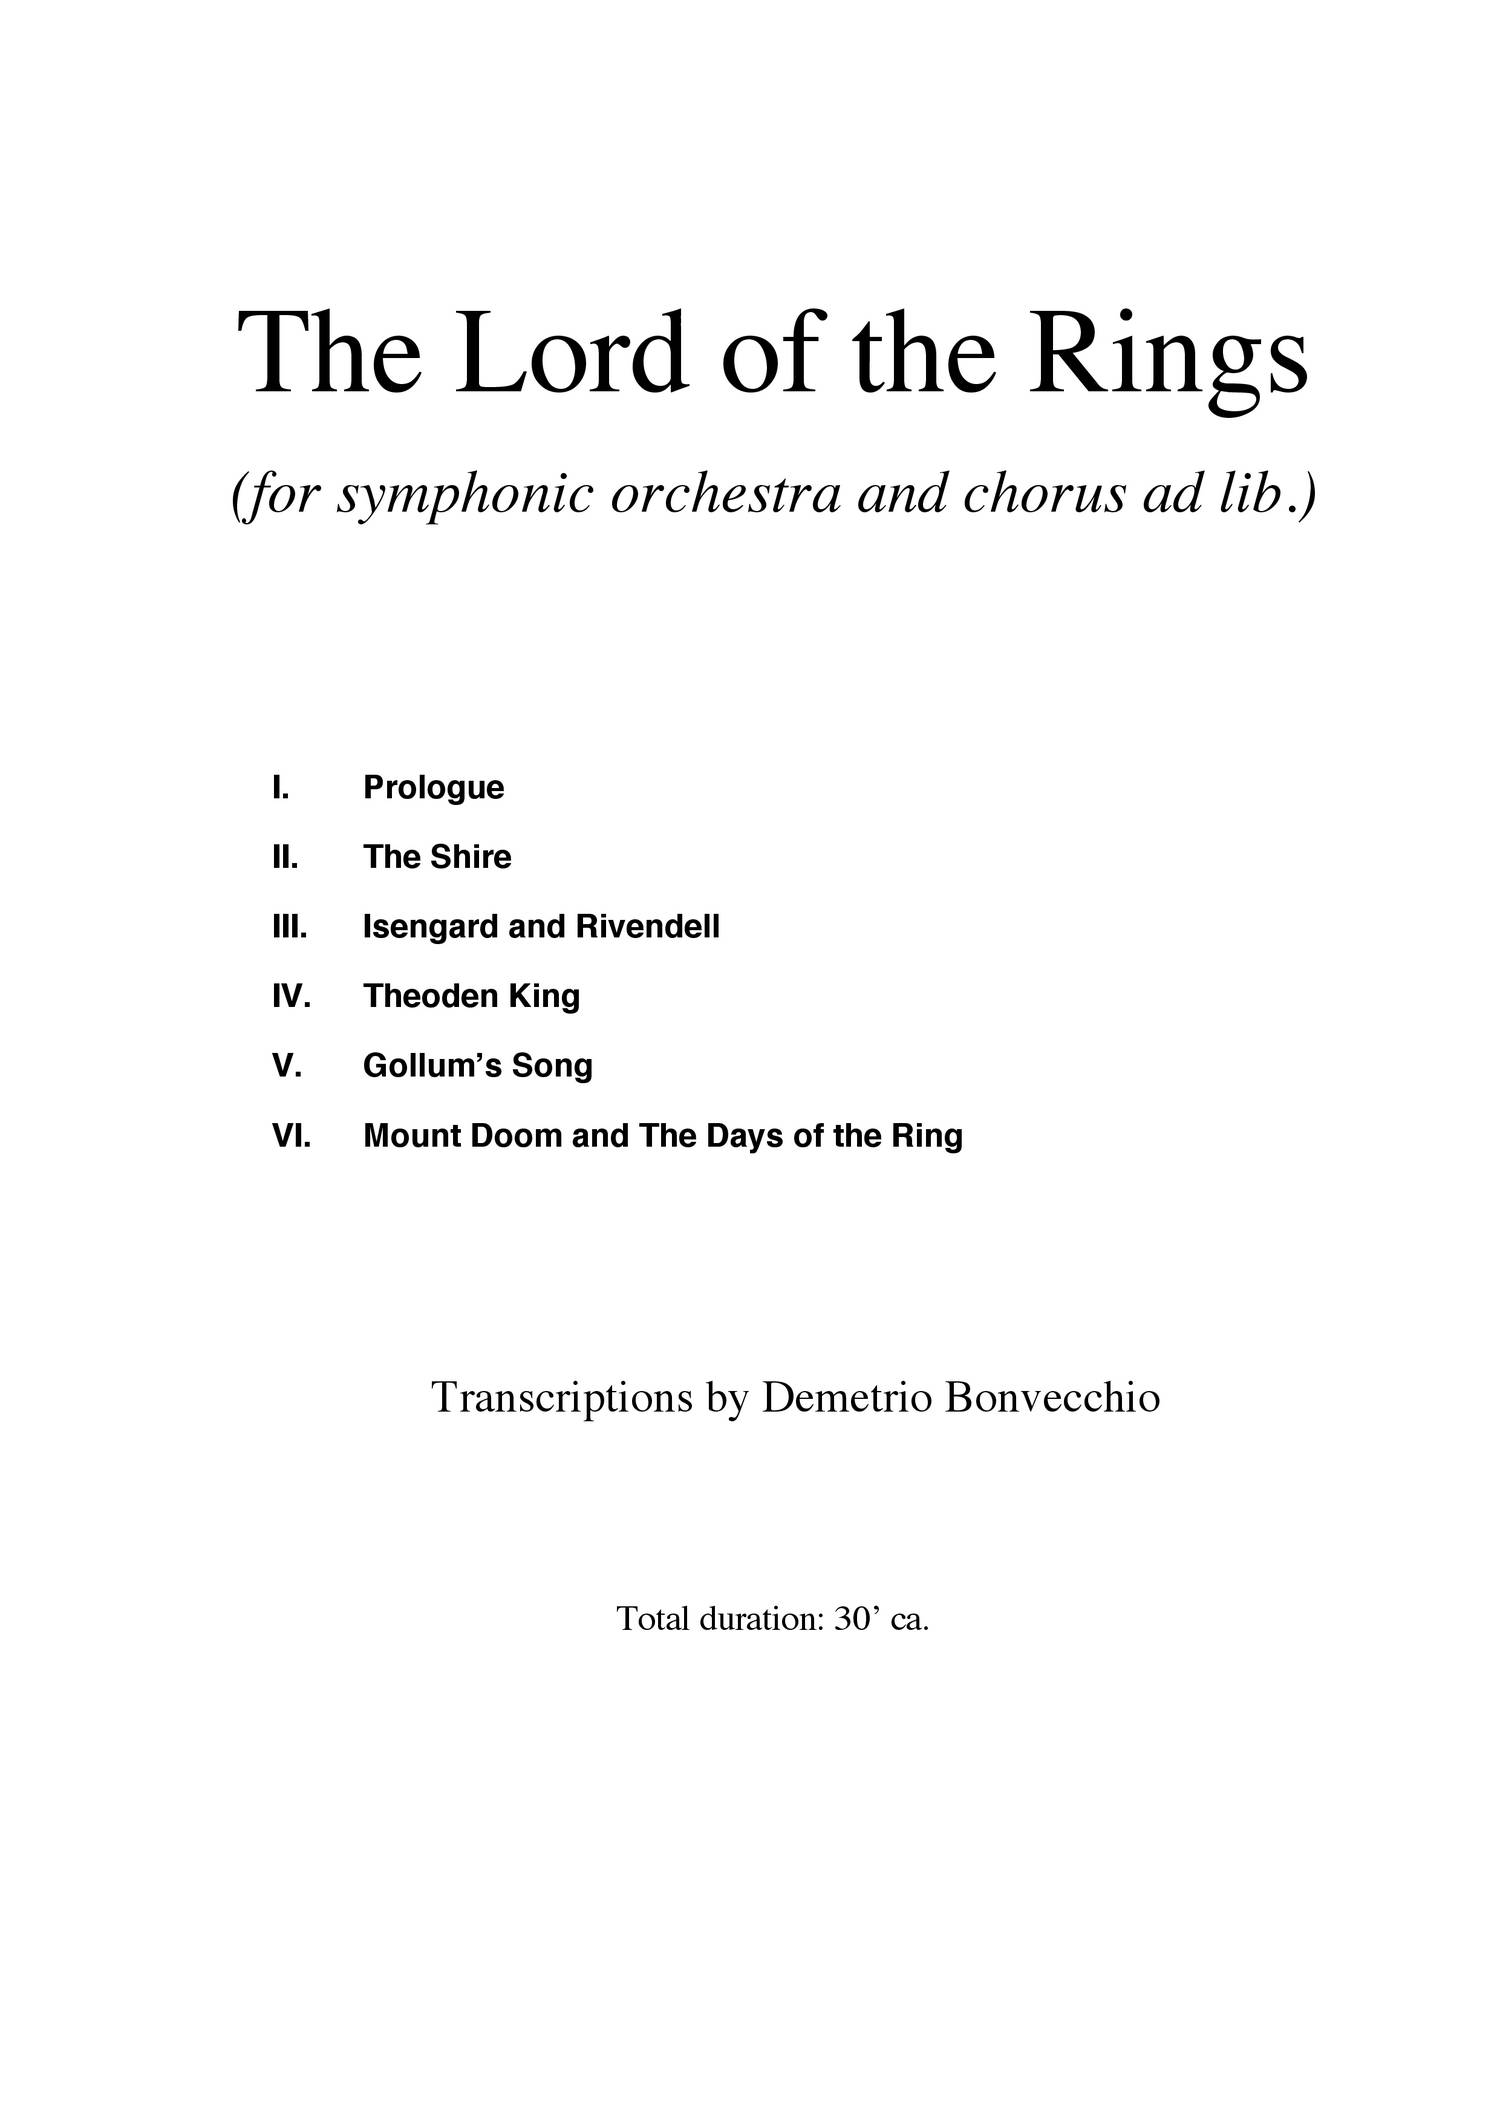 banjo Ordinere ballet Howard Shore - The Lord of The Rings Selections.pdf | DocDroid